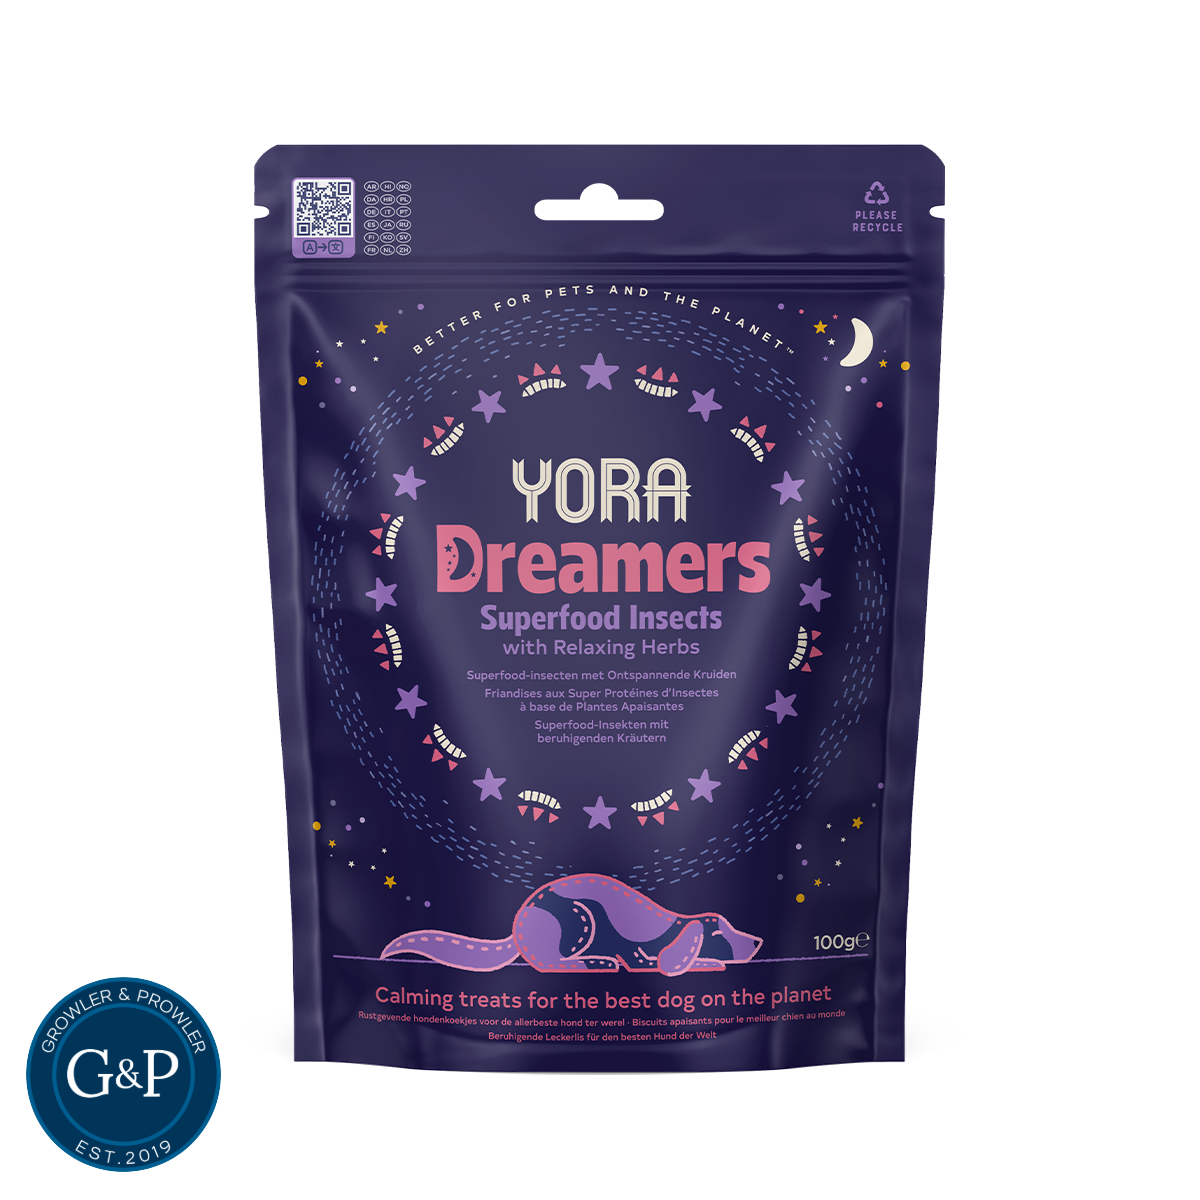 Yora Dreamers Superfood Insect with Relaxing Herbs Dog Treats